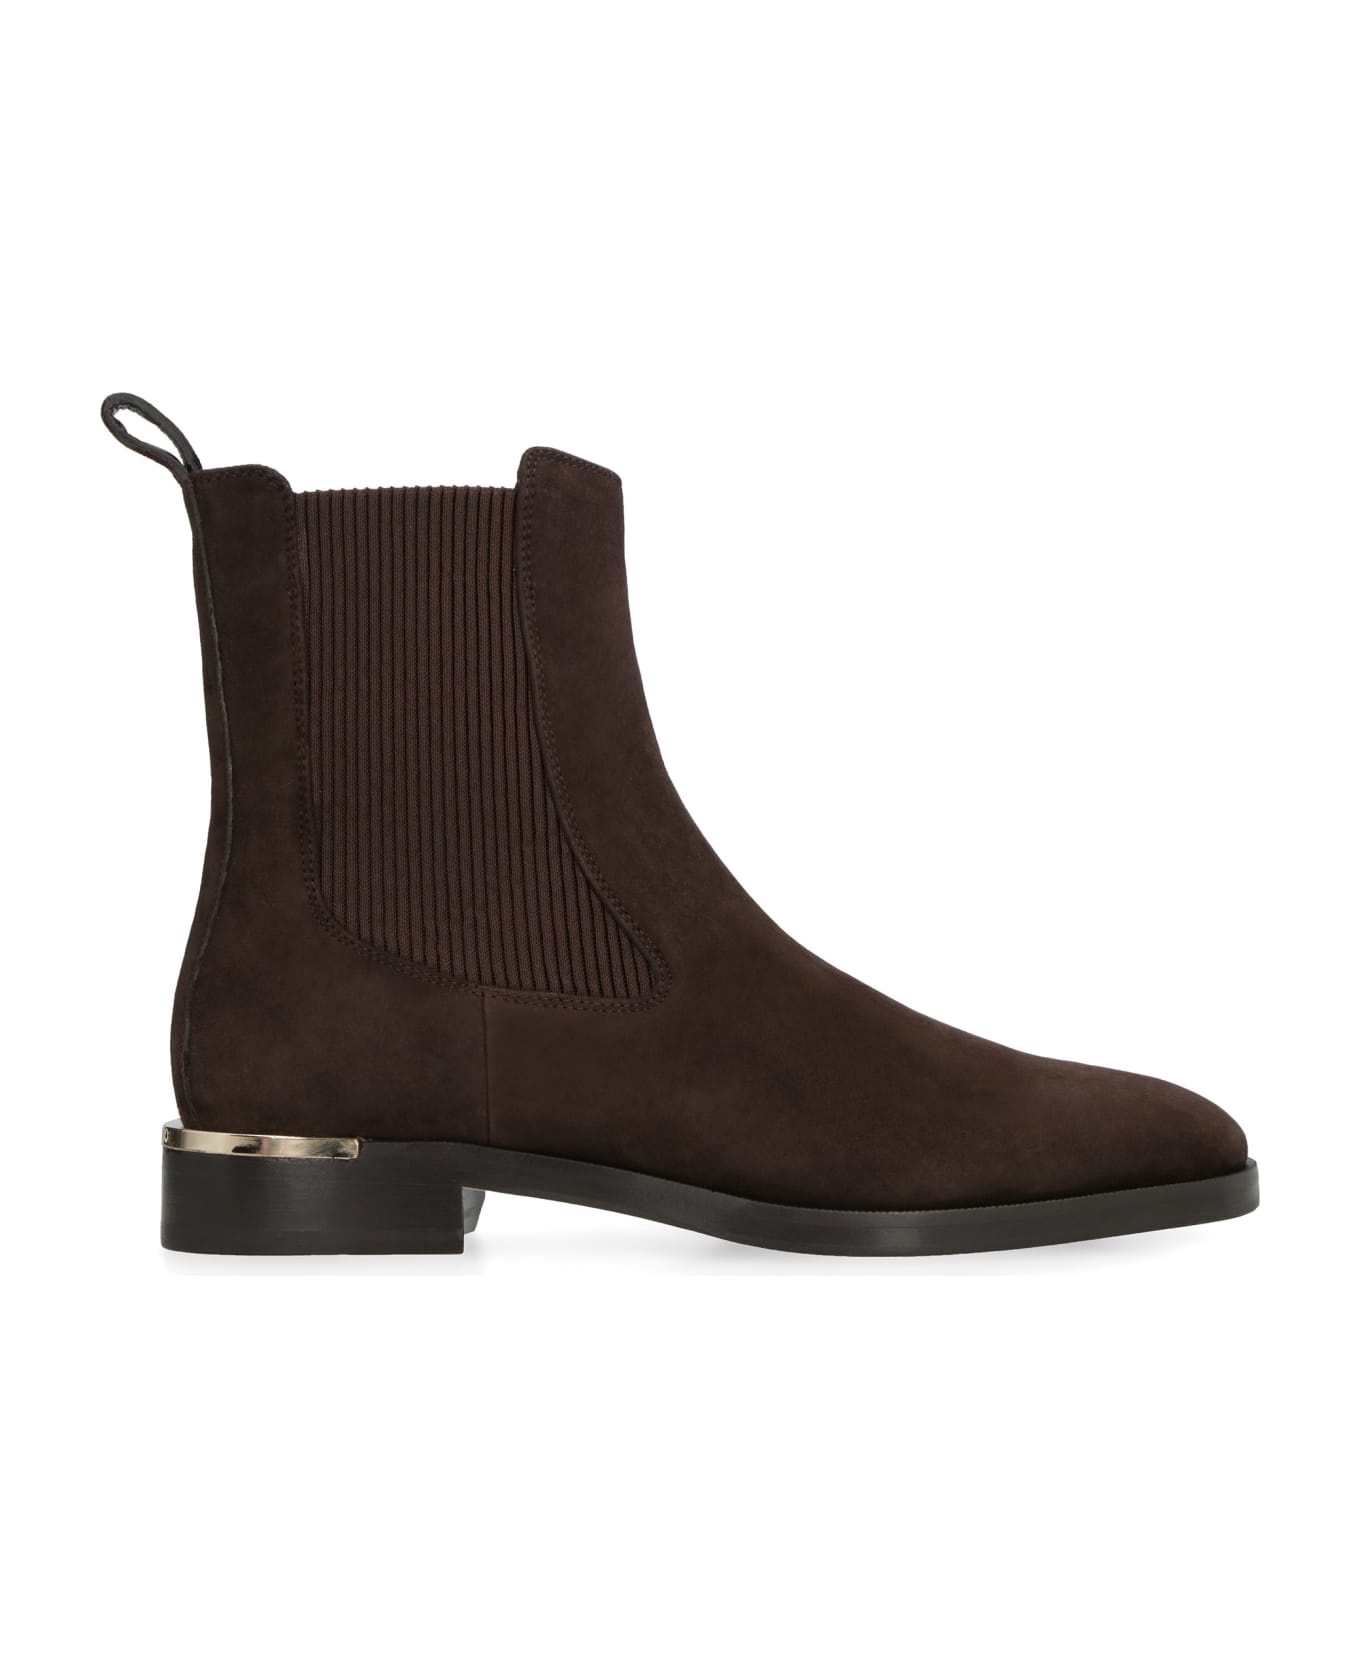 Jimmy Choo The Sally Suede Chelsea Boots - brown